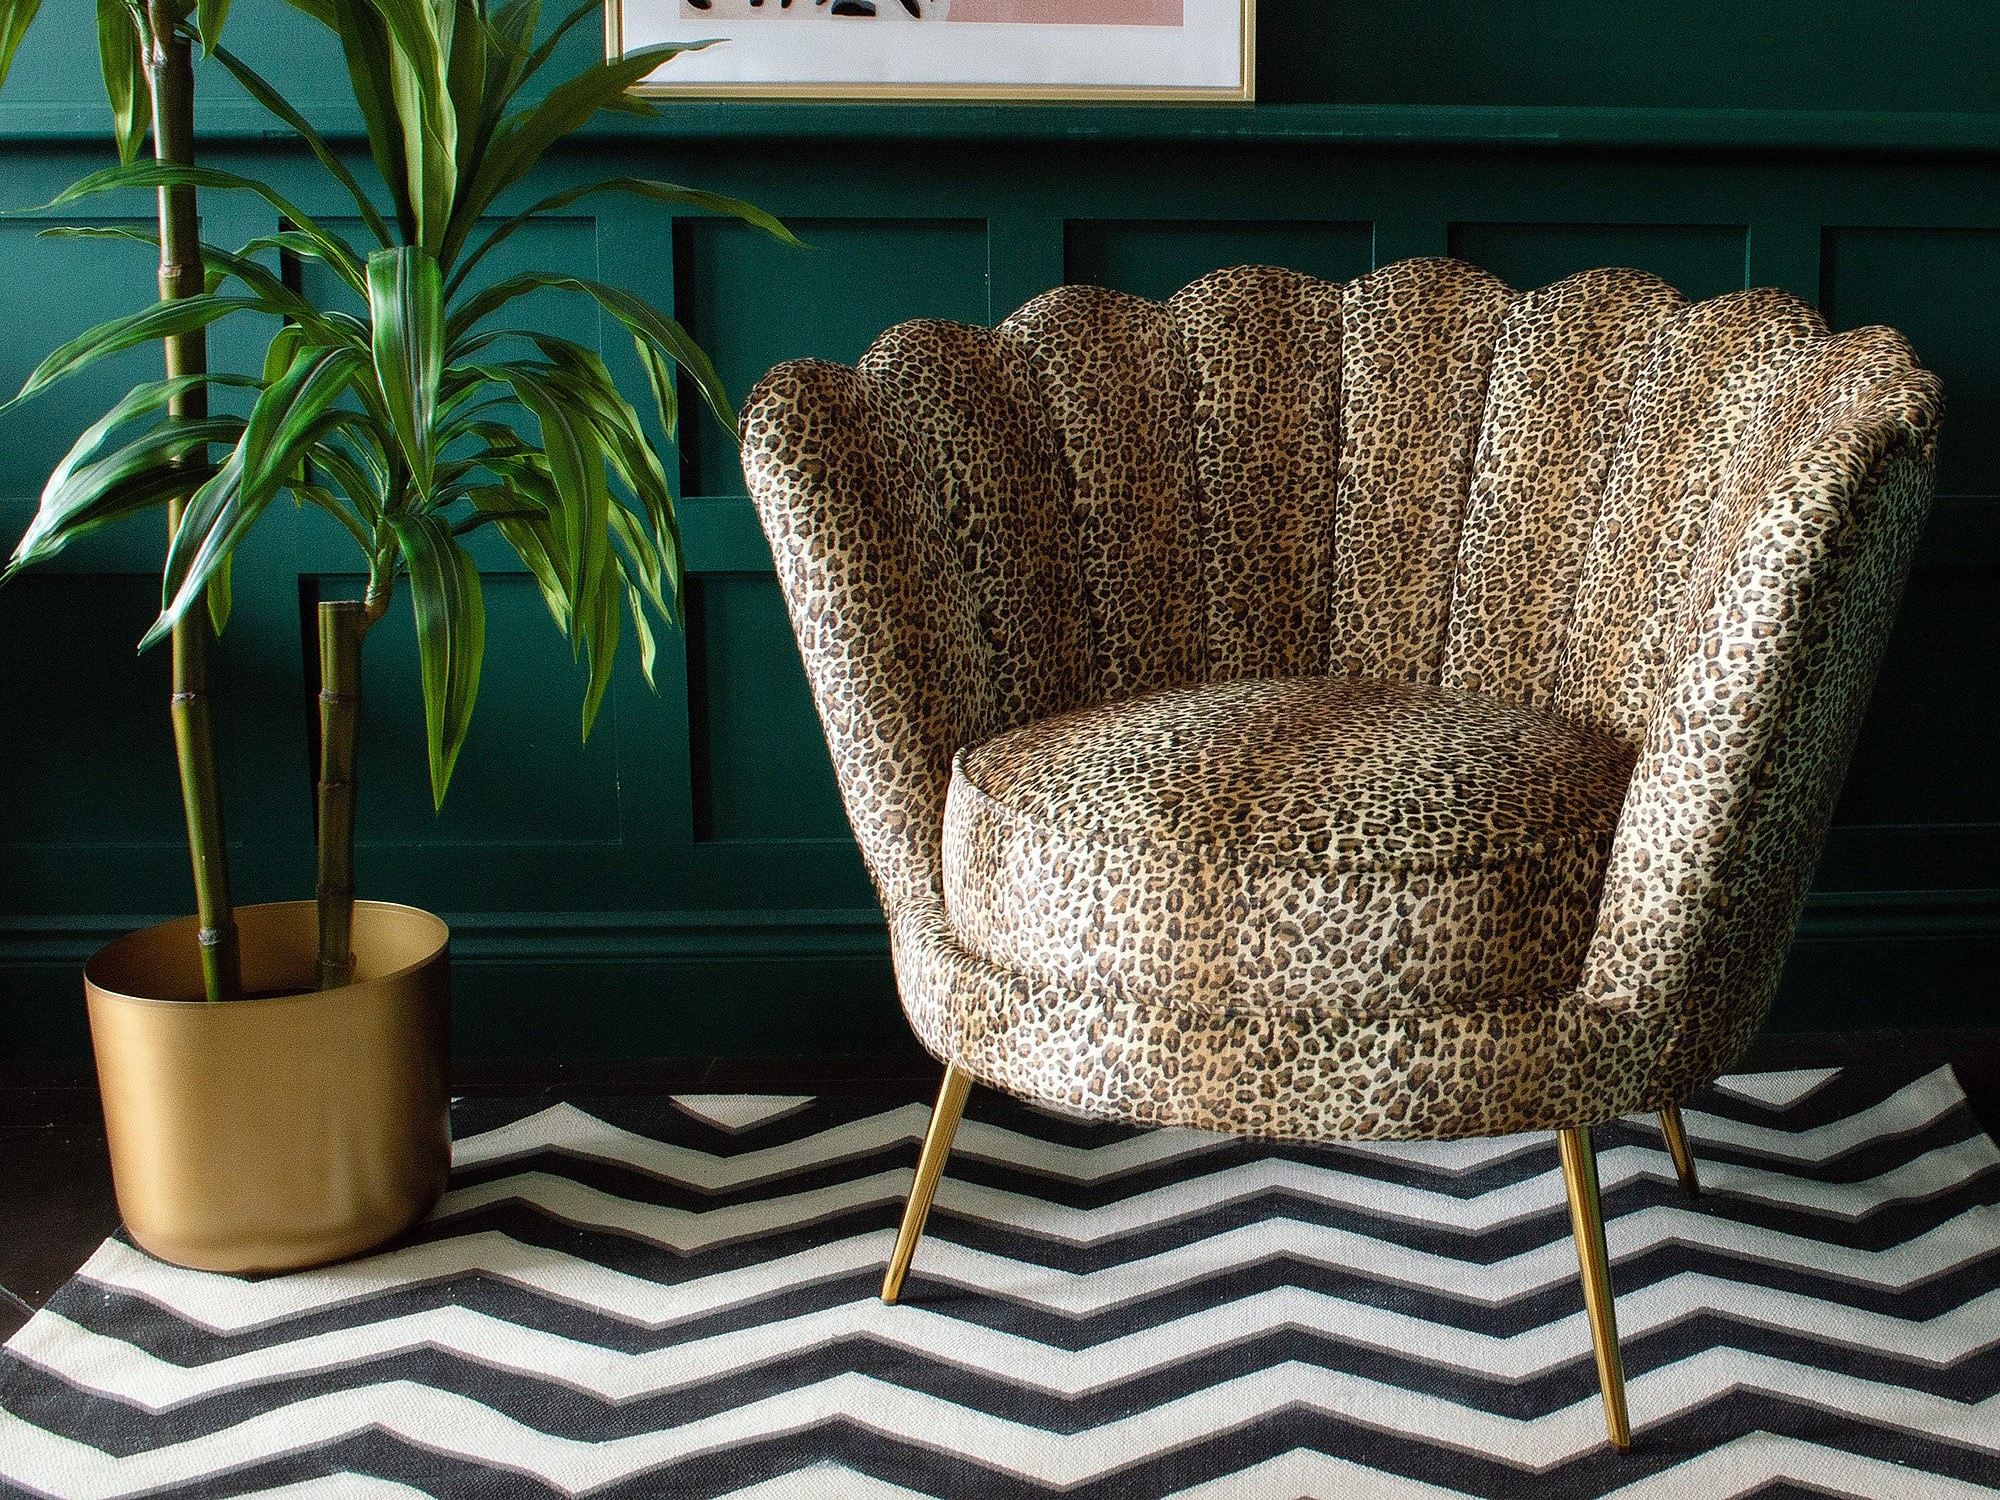 A leopard print armchair on a black and white pattern rug next to a potted bamboo plant